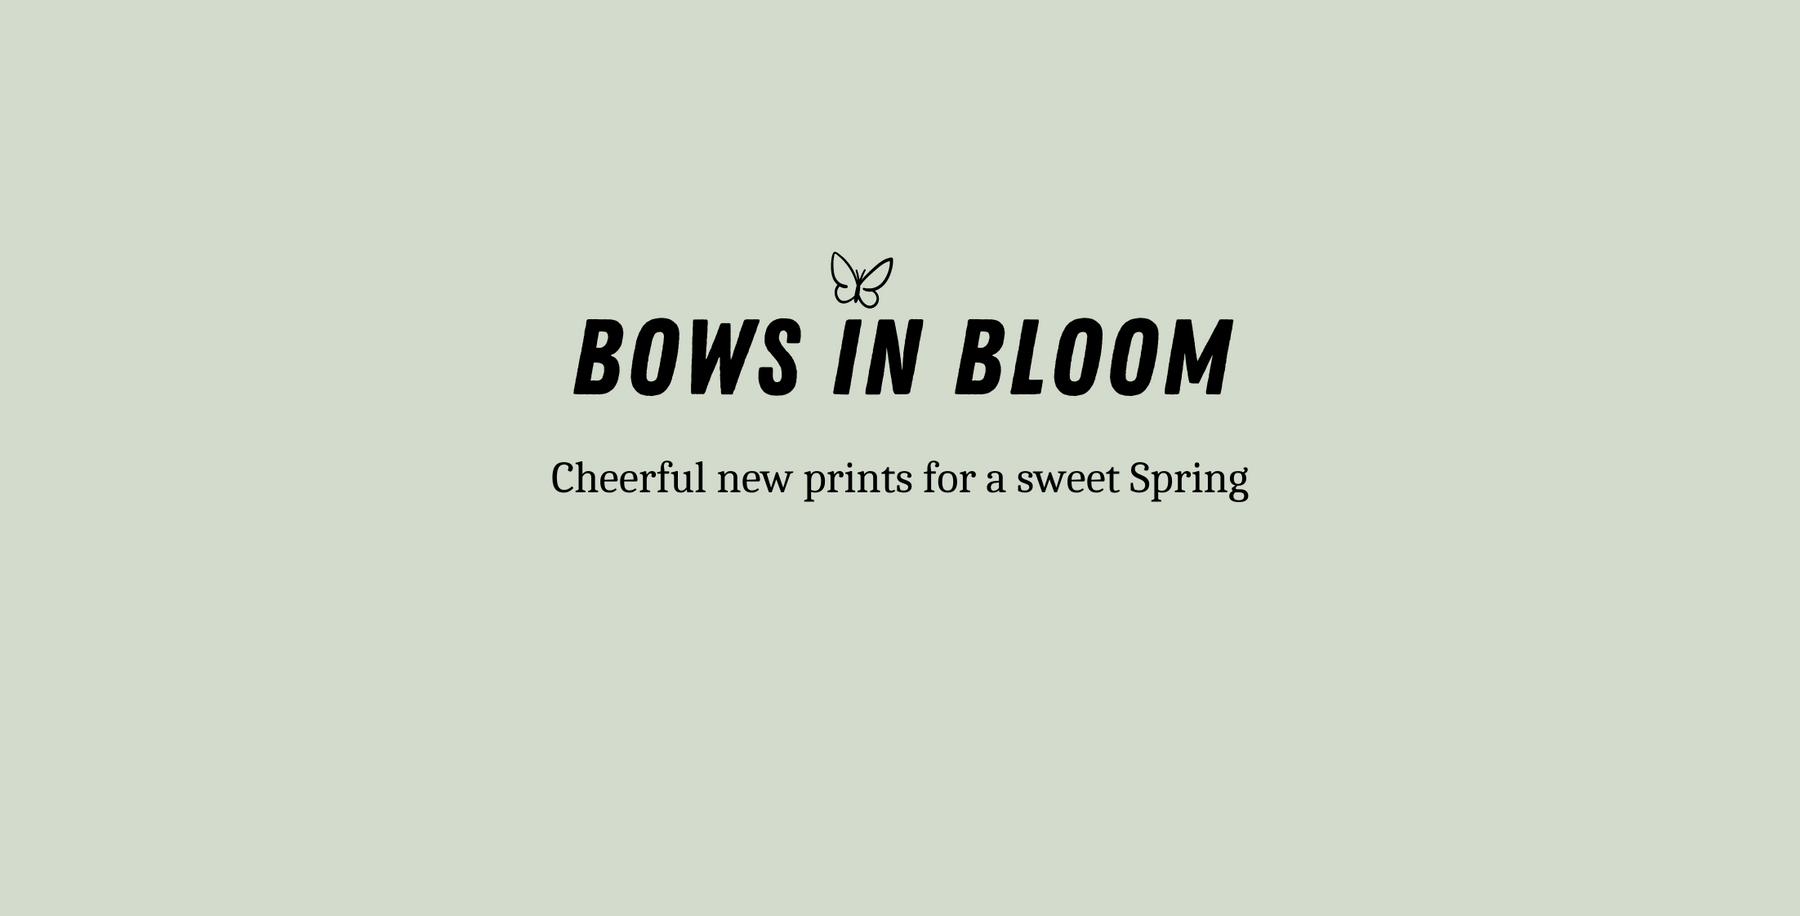 Bows in Bloom. Cheerful new prints for a sweet spring.